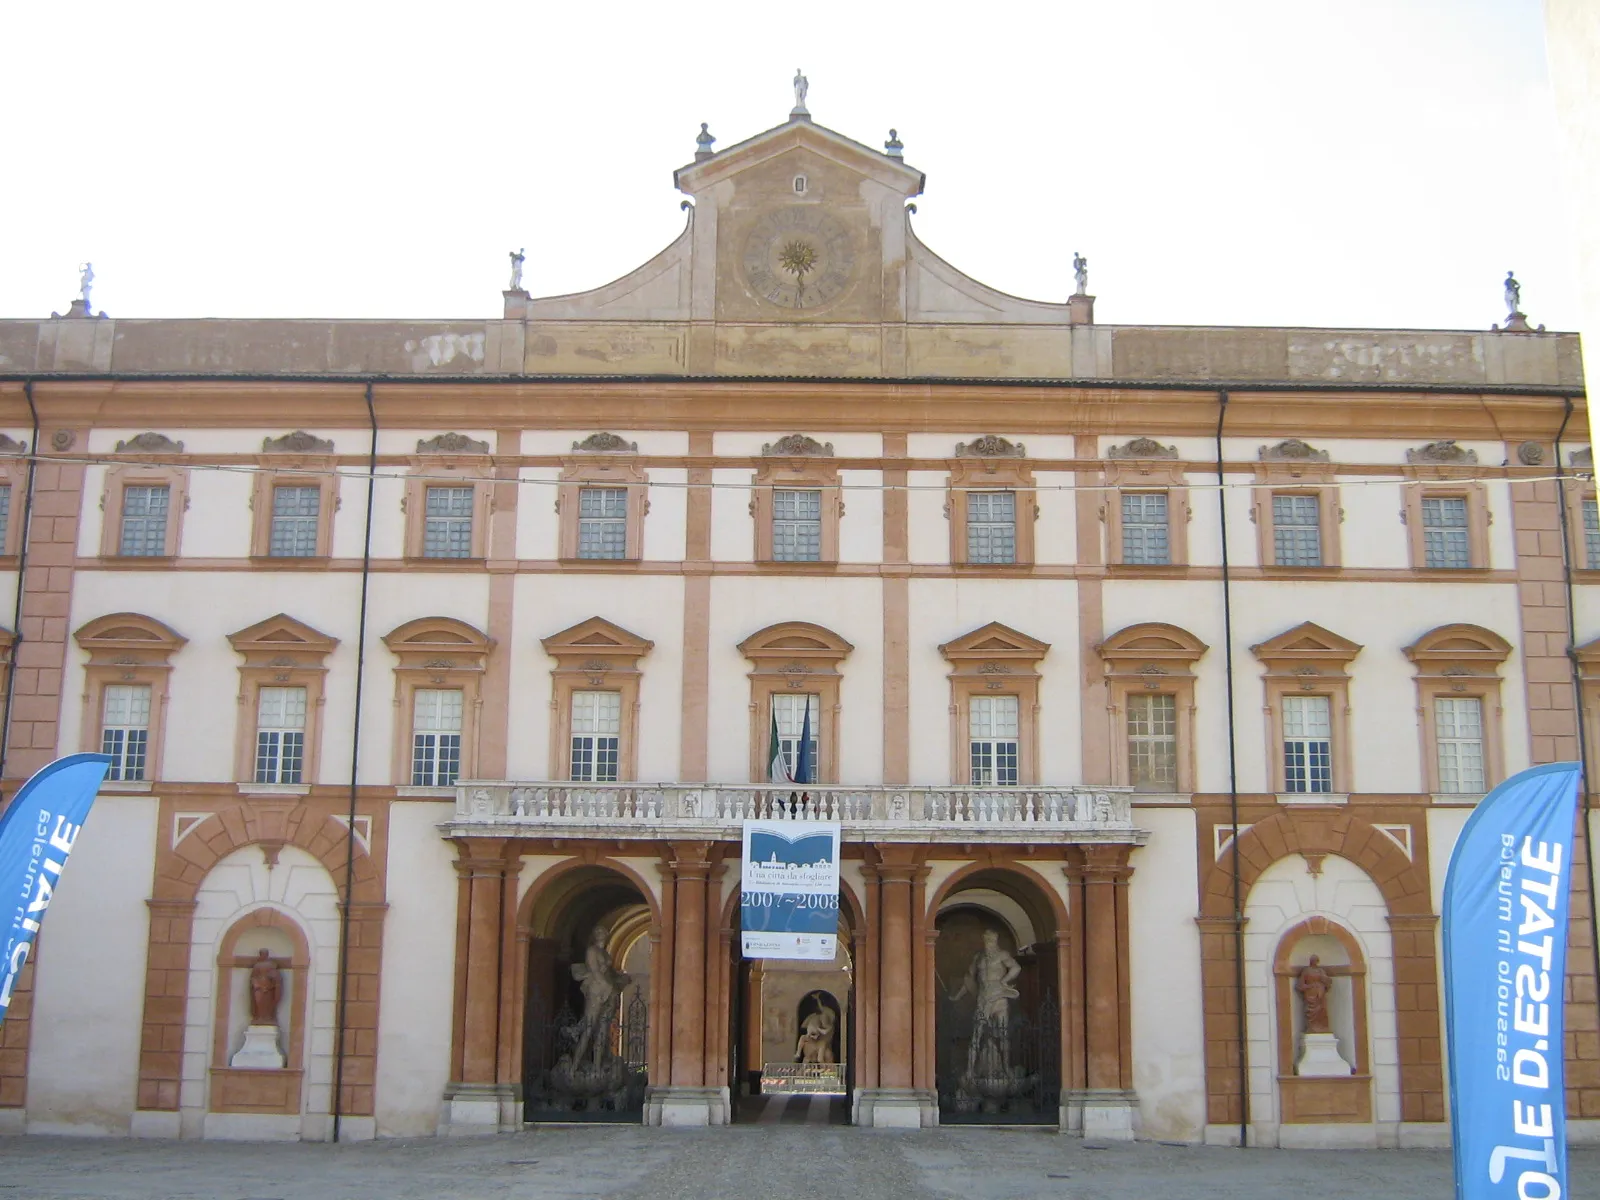 Photo showing: Main façade of the ducal palace in Sassuolo, province of Modena, Italy